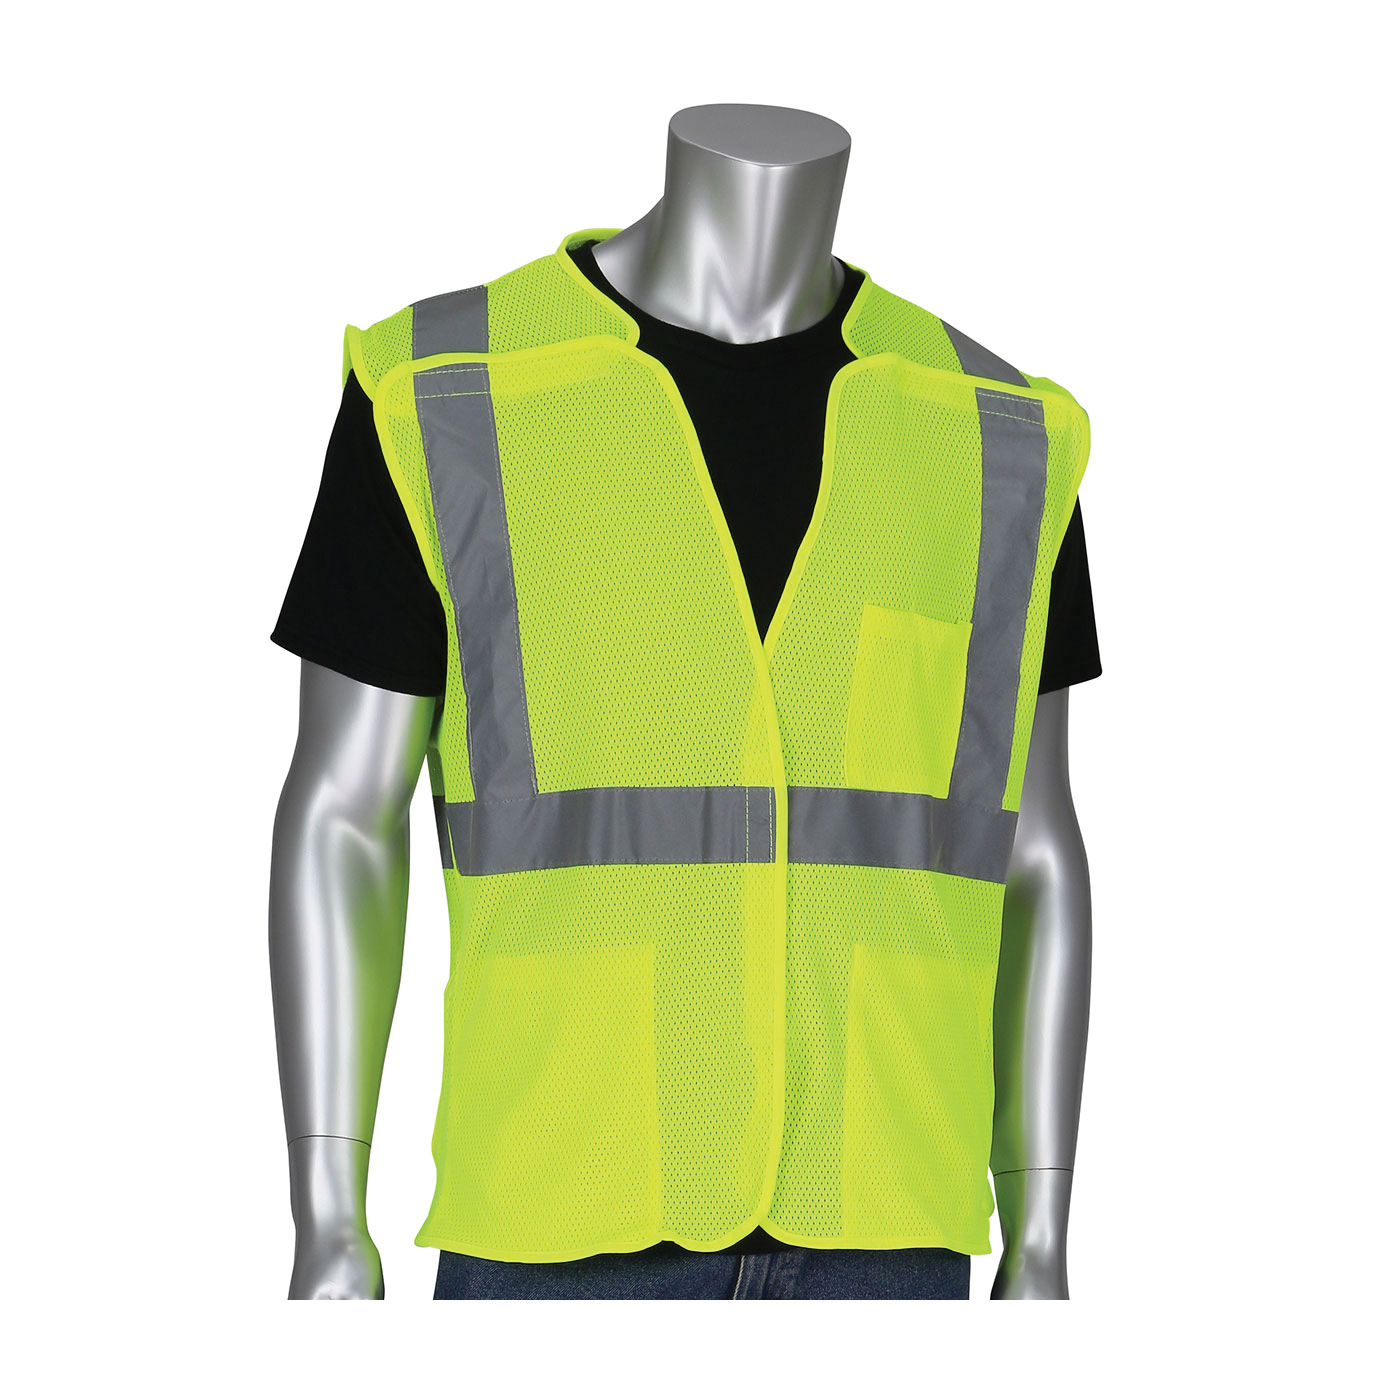 PIP® 302-5PMVLY-XL Safety Vest, XL, Hi-Viz Lime Yellow, Polyester, Hook and Loop Closure, 3 Pockets, ANSI Class: Class 2, Specifications Met: ANSI 107 Type R